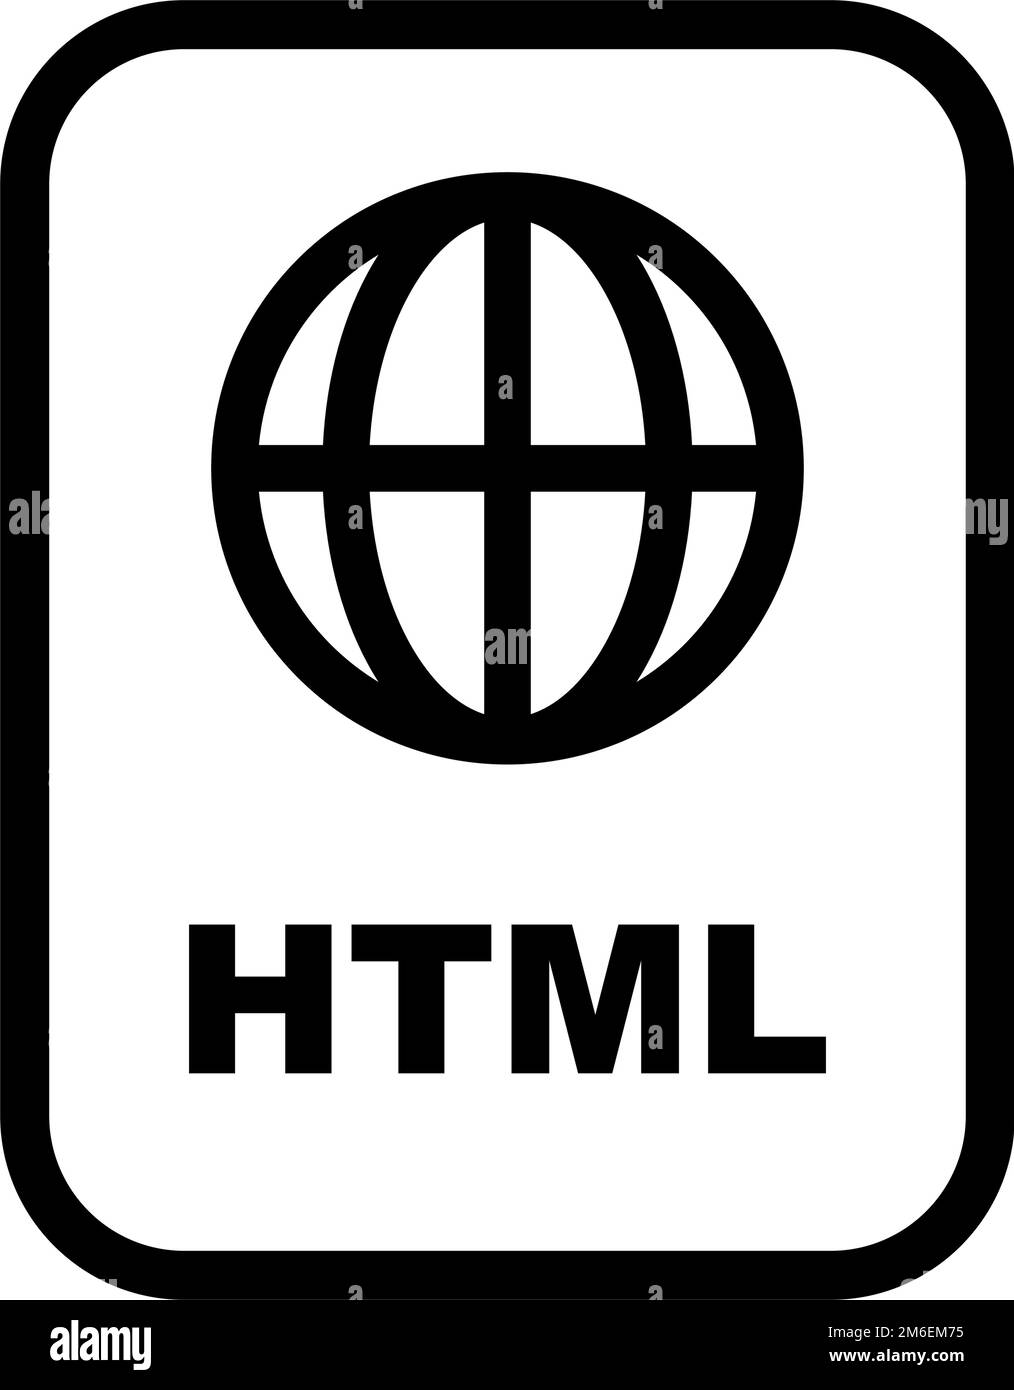 html page icon